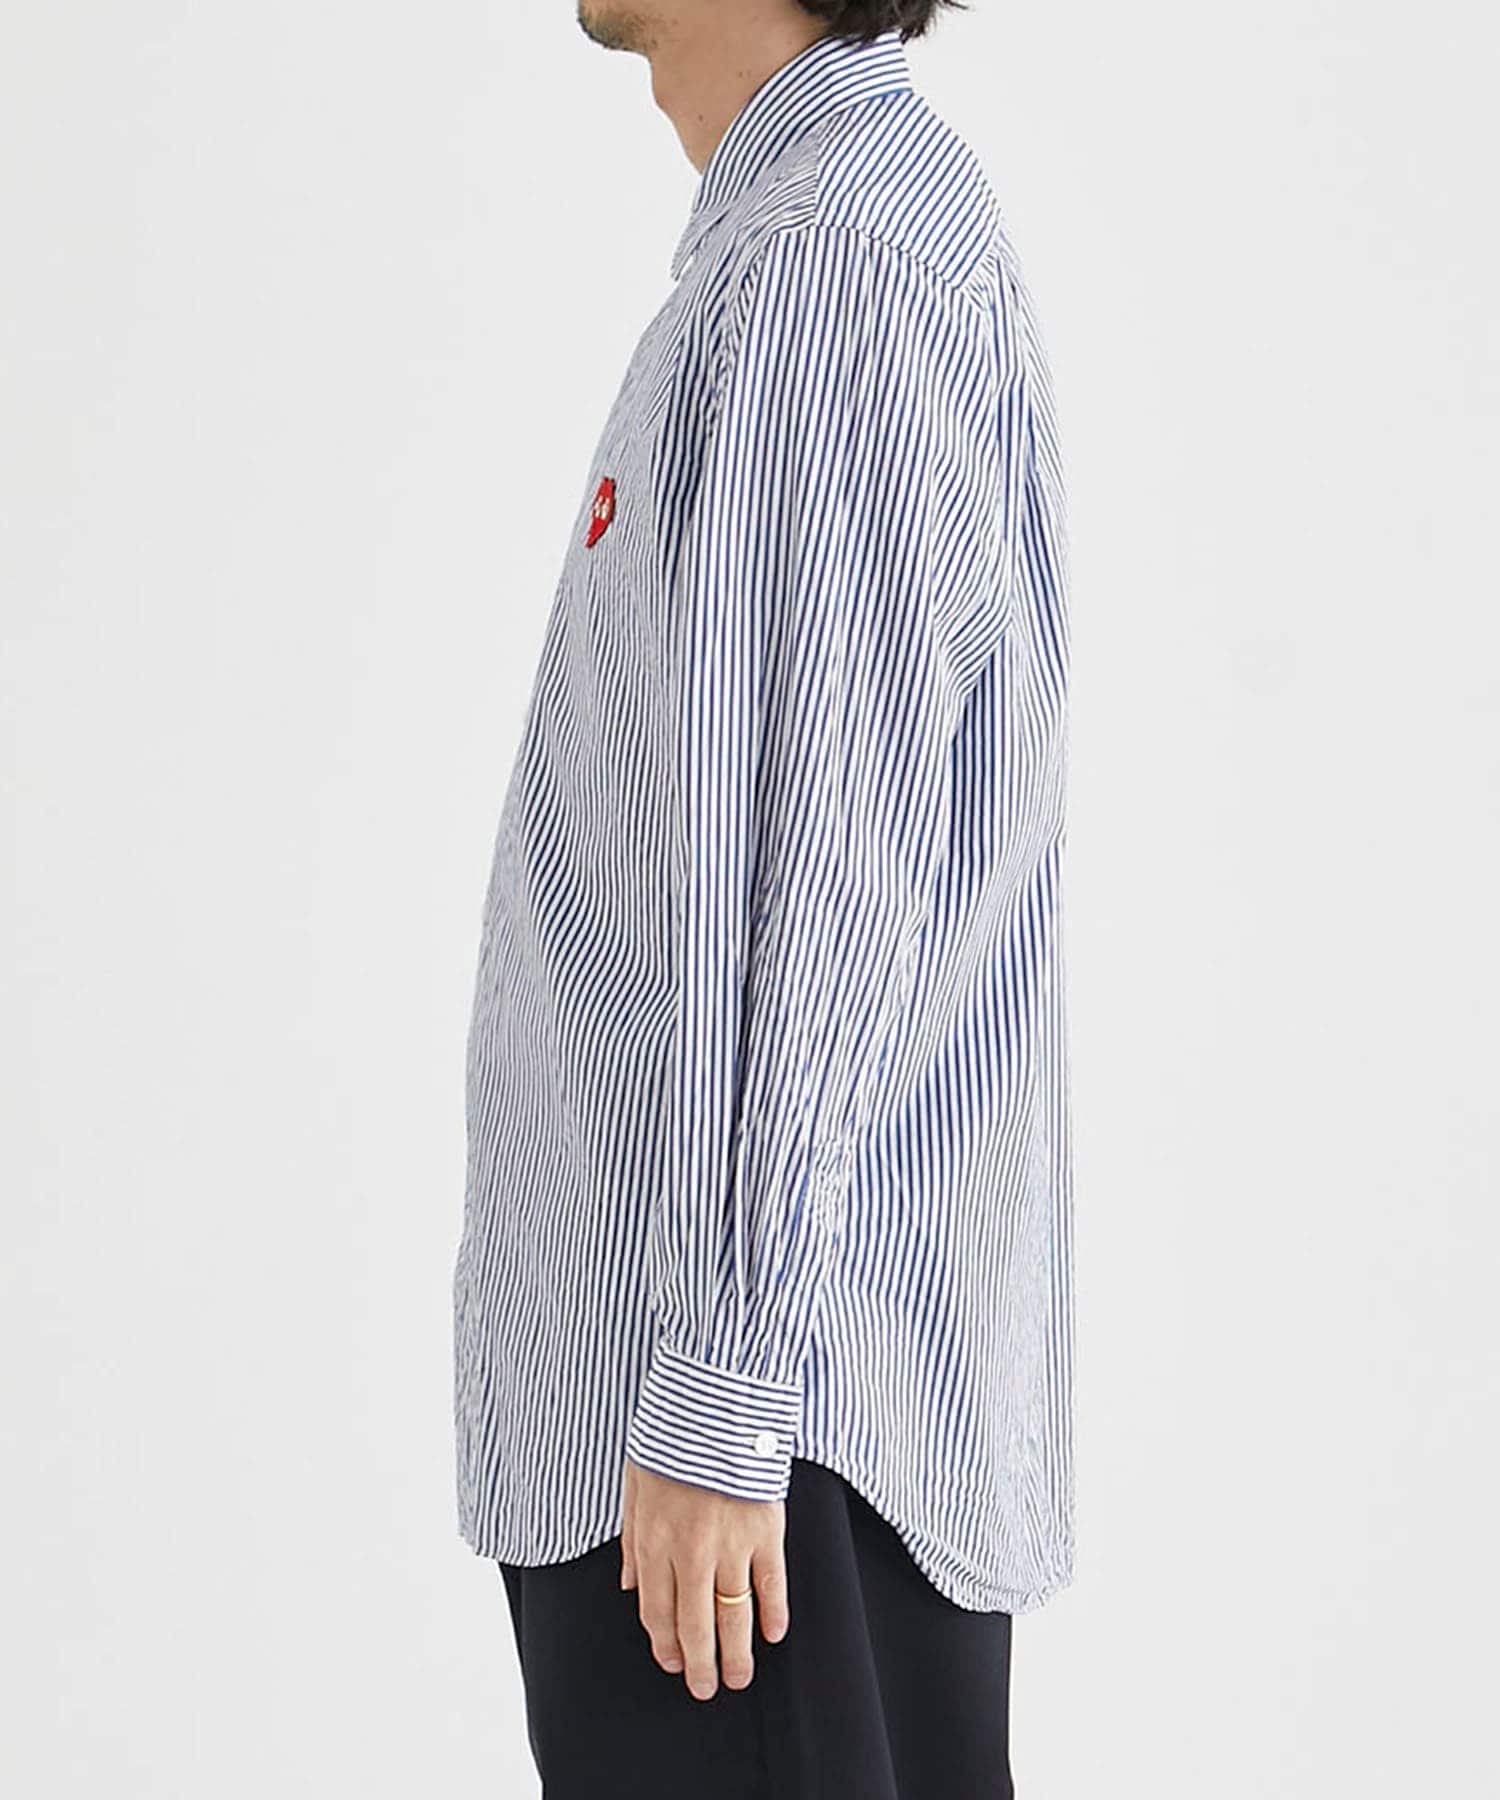 MENS STRIPED SHIRT RED HEART(M STRIPE): PLAY COMME des GARCONS